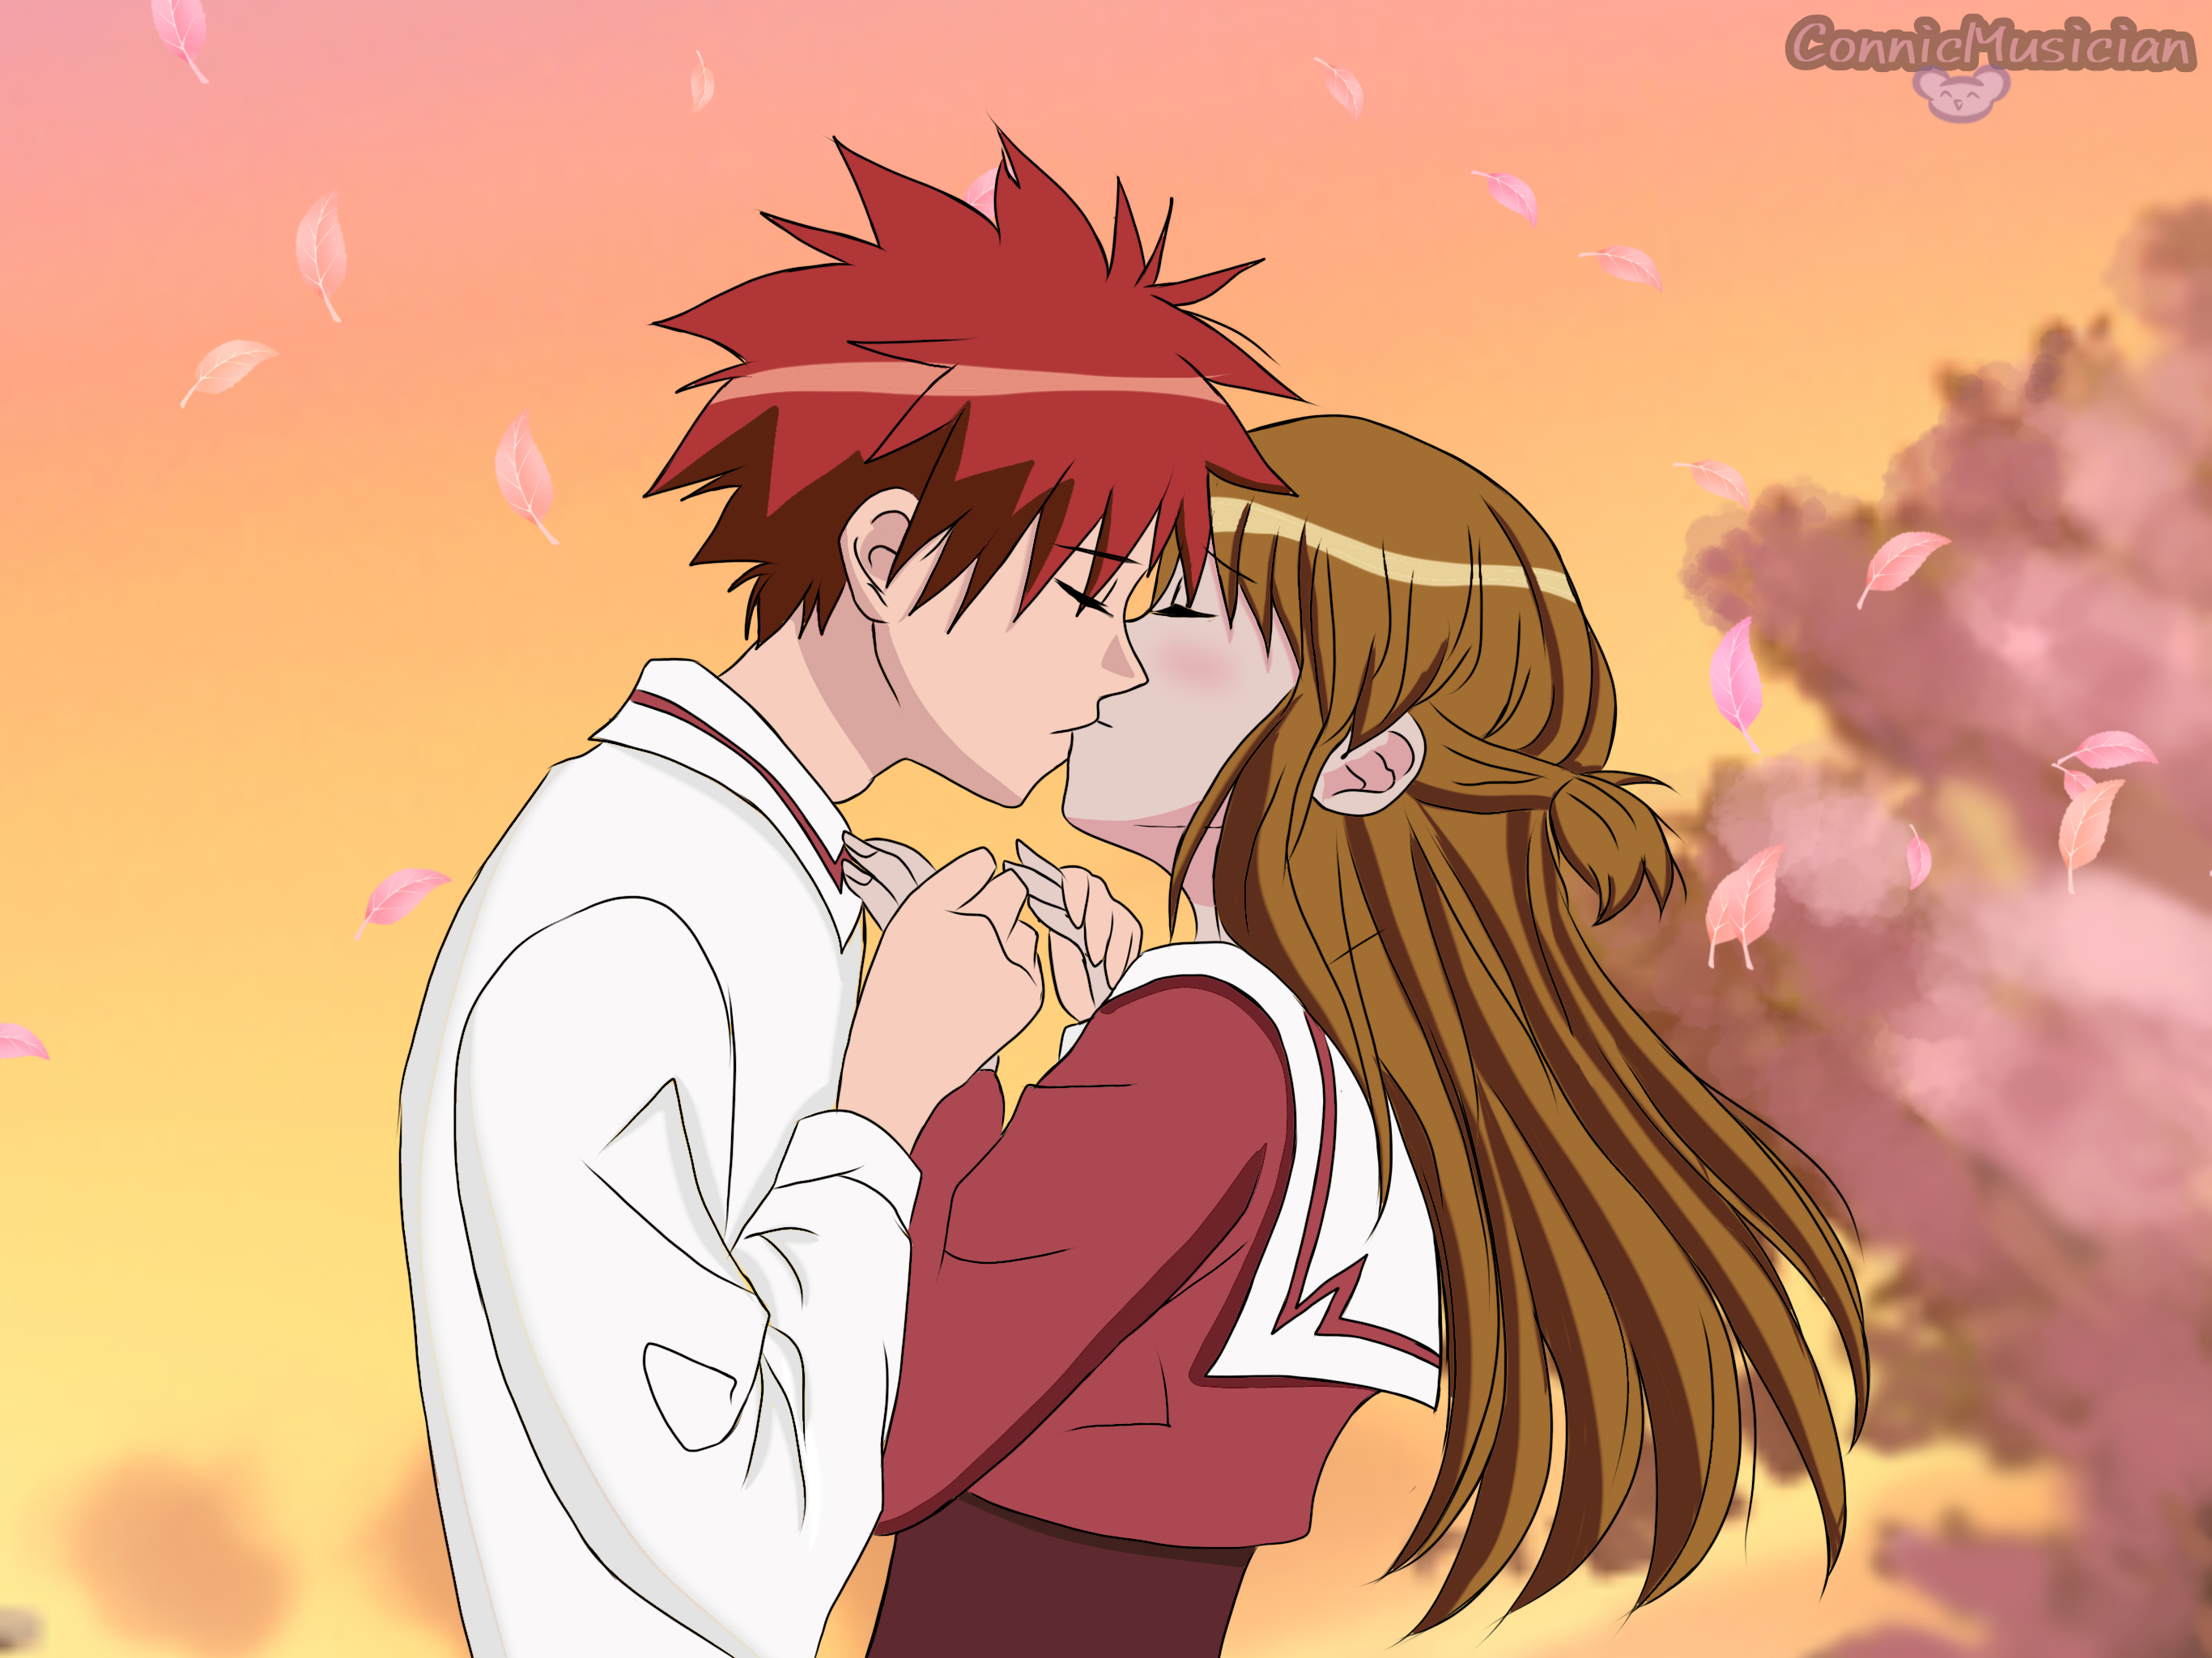  Angel: Daisuke and Amikas First Kiss! by ConnicMusician on DeviantArt